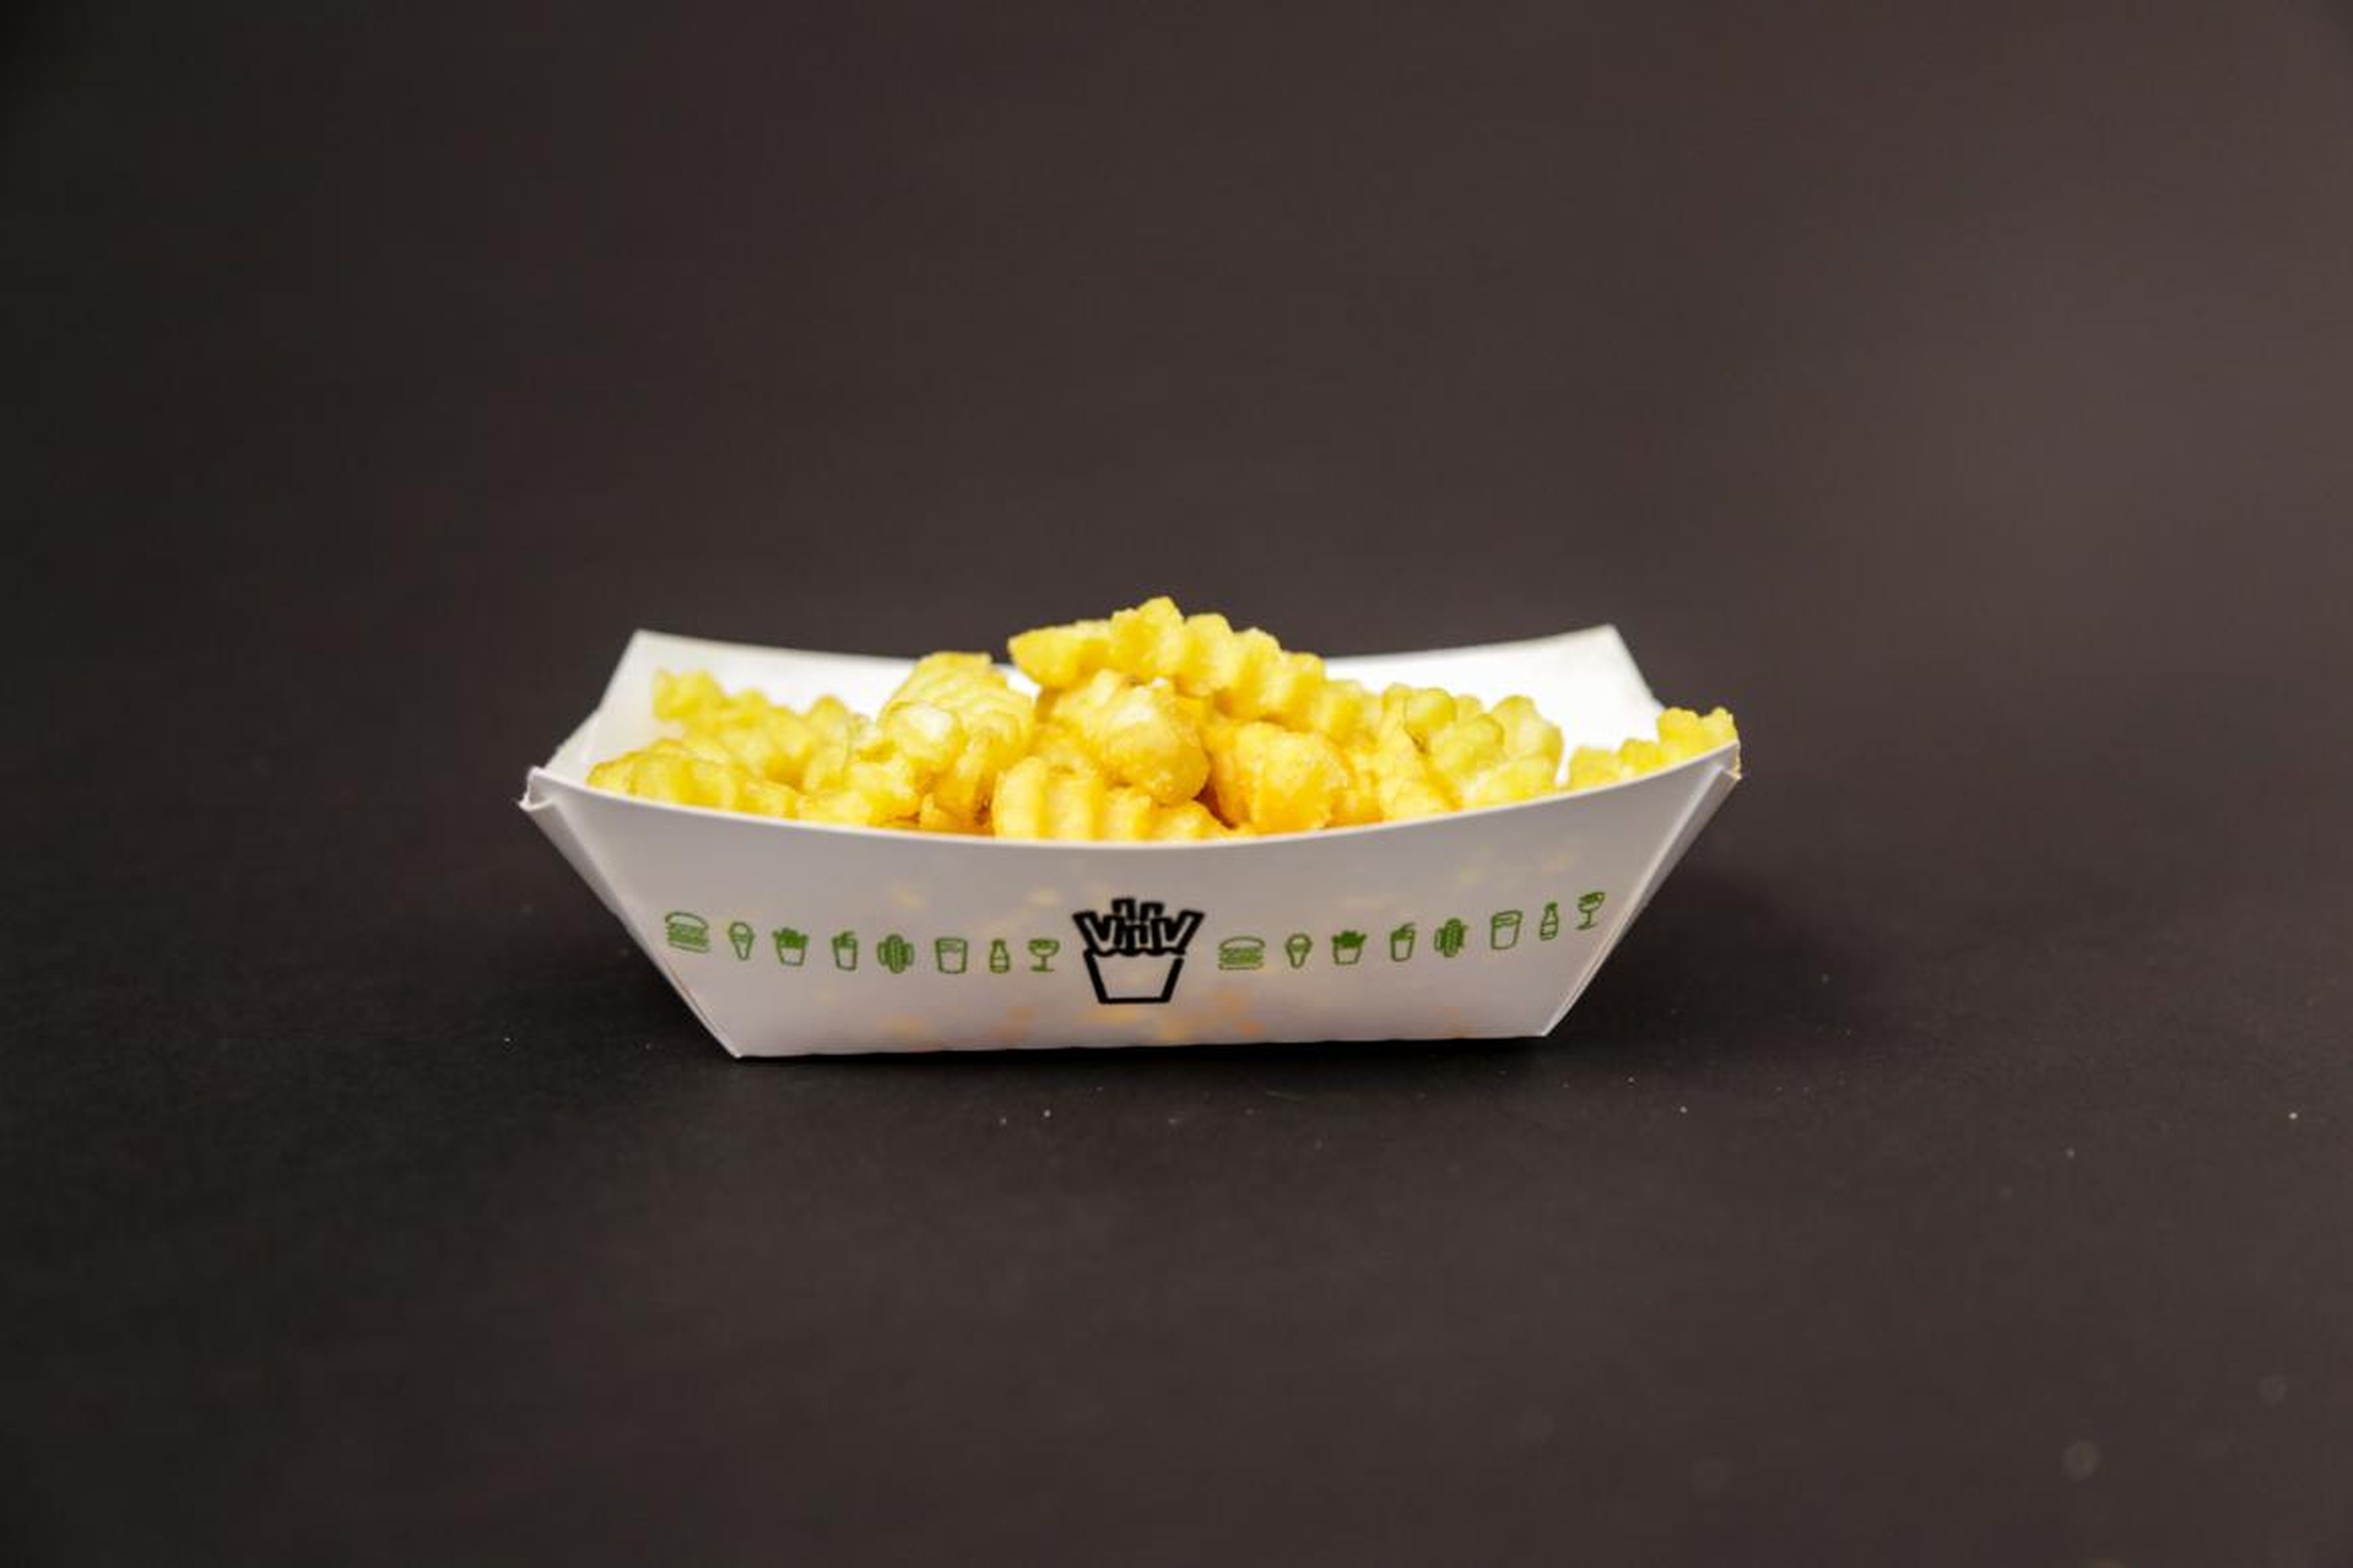 Crinkle-cut-fry skeptics are many and their voices loud, but Shake Shack's crinkle-cut fries don't care. They simply plug their ears and refuse to listen.